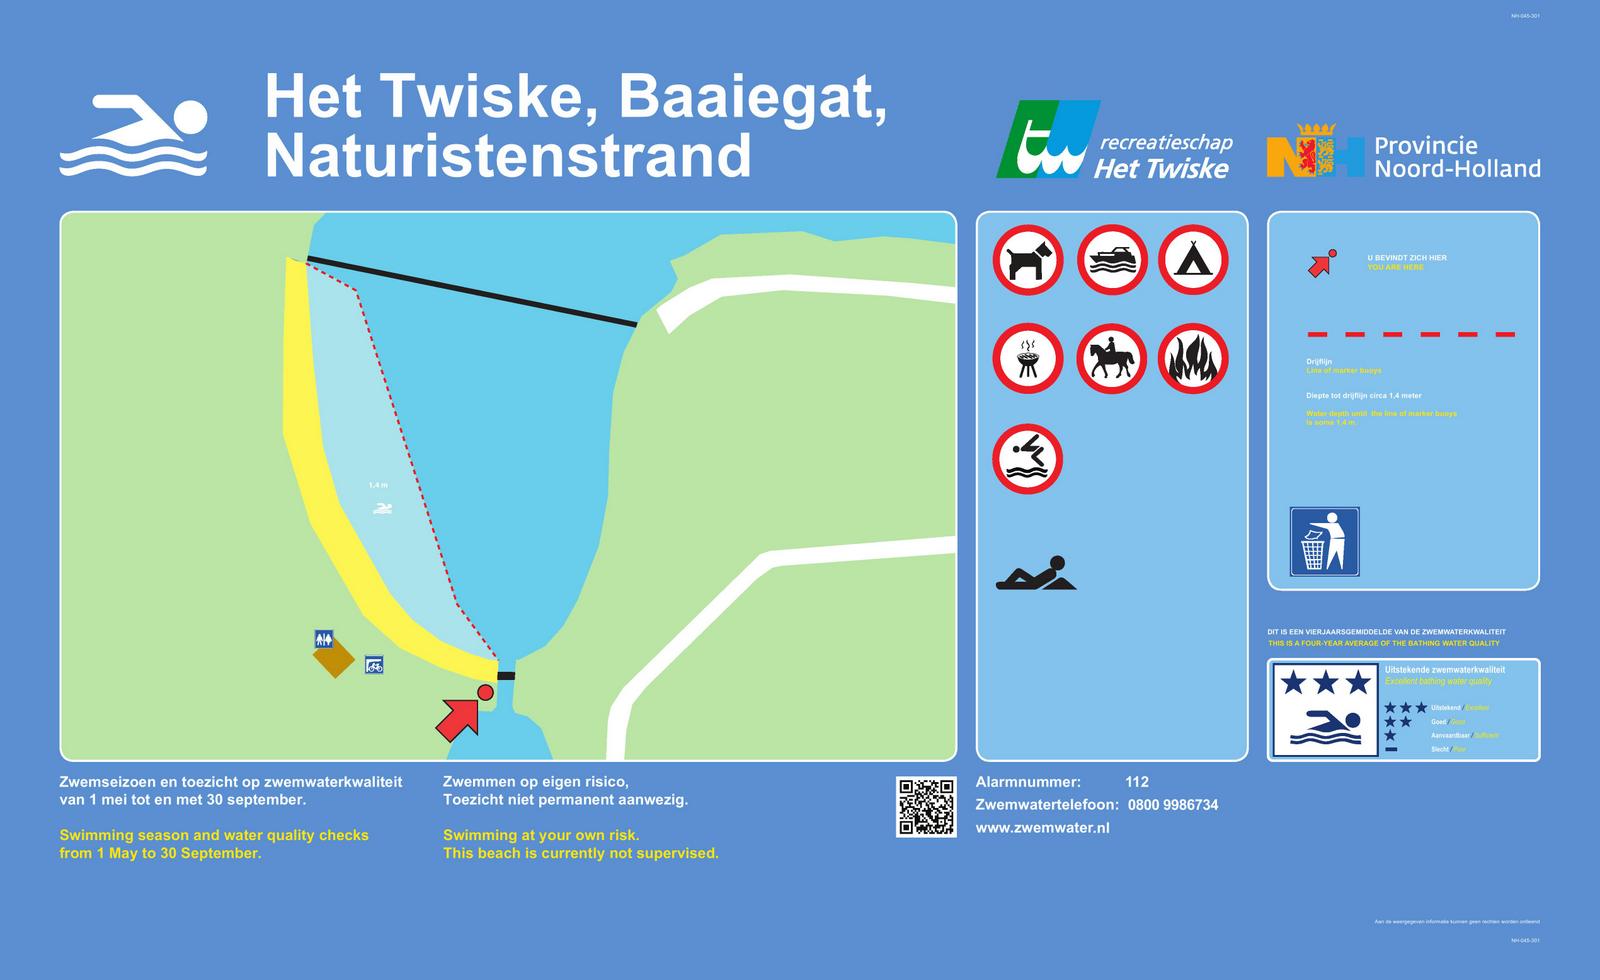 The information board at the swimming location Het Twiske Baaiegat Naturistenstrand